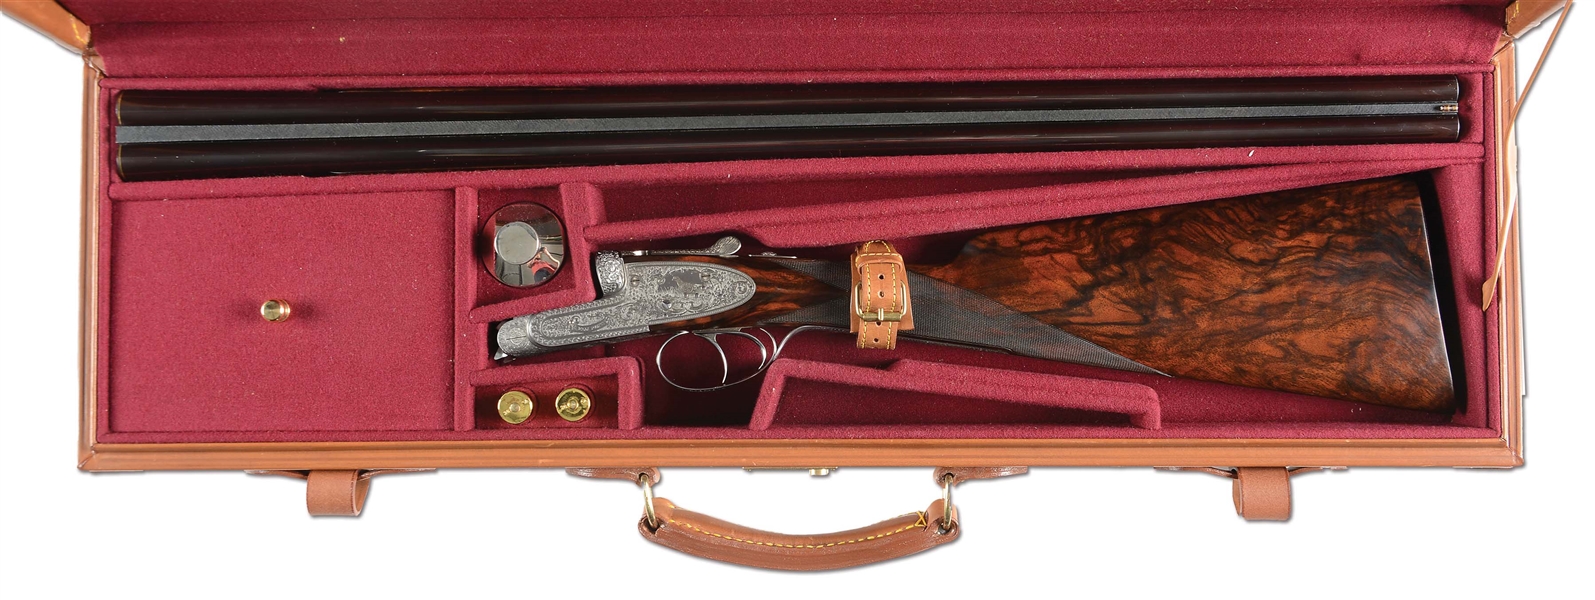 (M) BEAUTIFUL LITTLE 28 BORE SIDELOCK EJECTOR, DOUBLE TRIGGER PIOTTI MONACO SPECIAL GAME GUN WITH EXTREMELY ATTRACTIVE SCROLL AND GAME SCENES AND DEEP RELIEF CARVED FENCES BY MARIO TERZI WITH CASE.